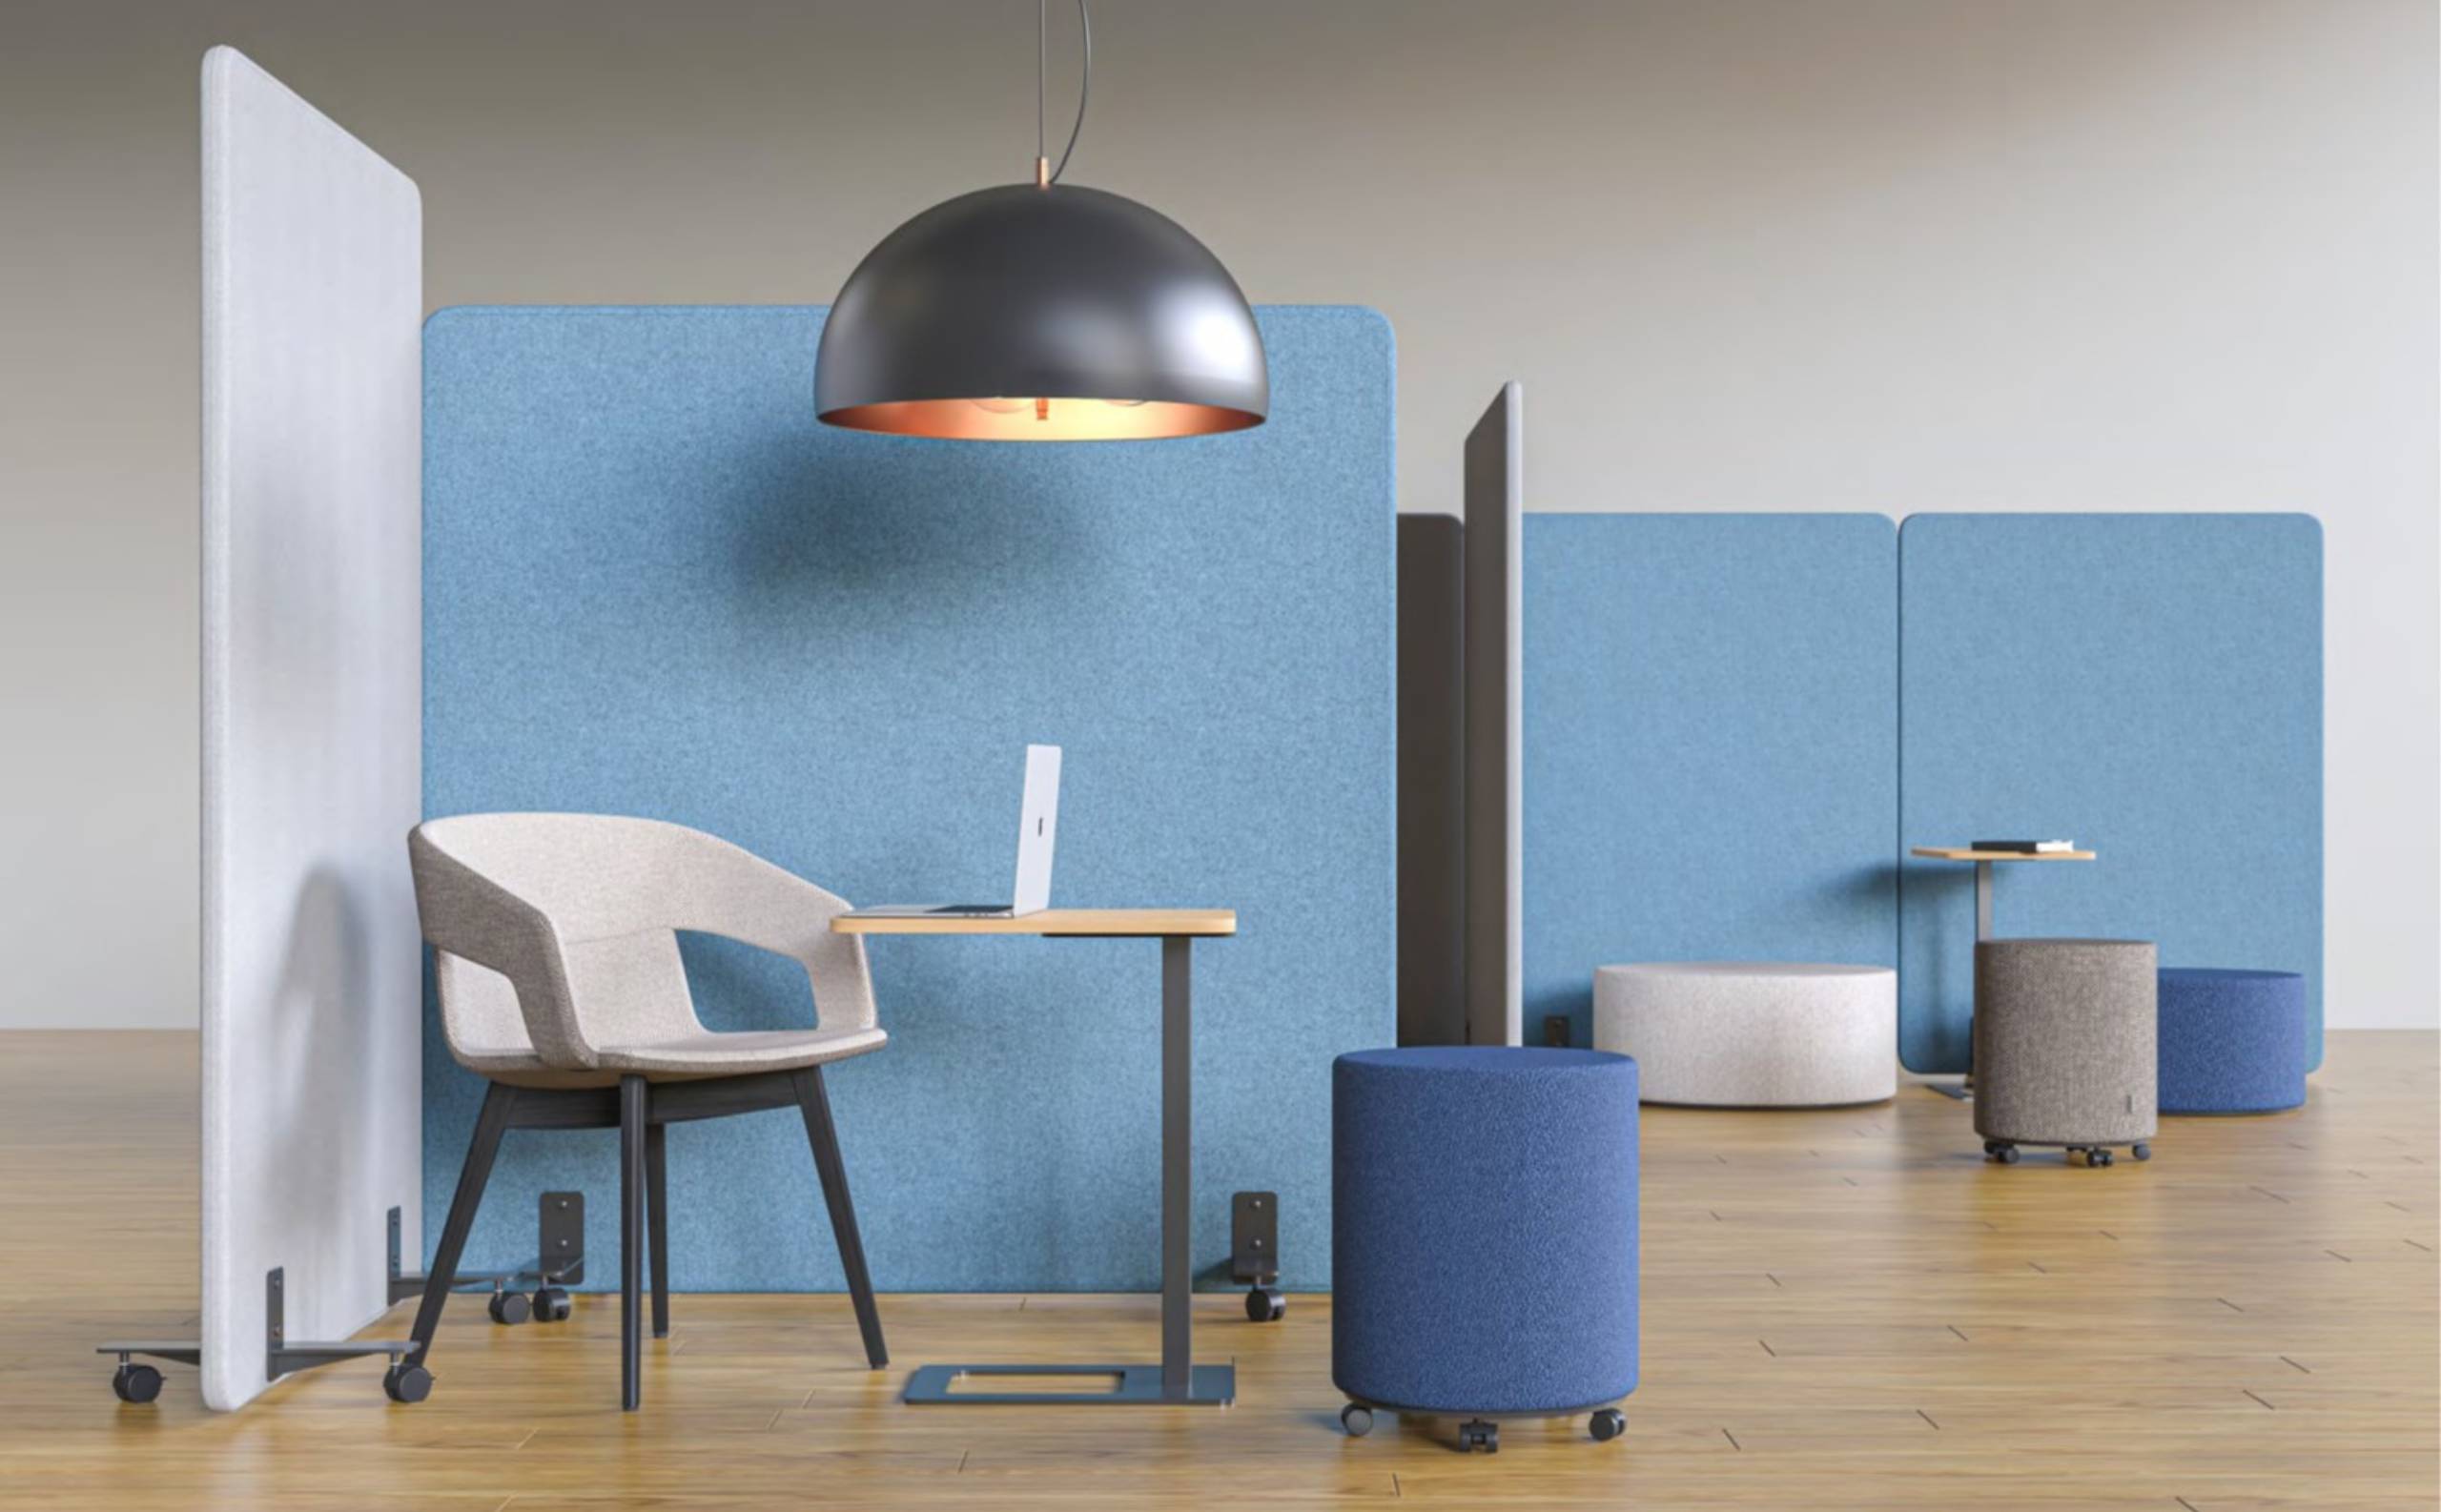 Acoustic panels to work in a quiet environment